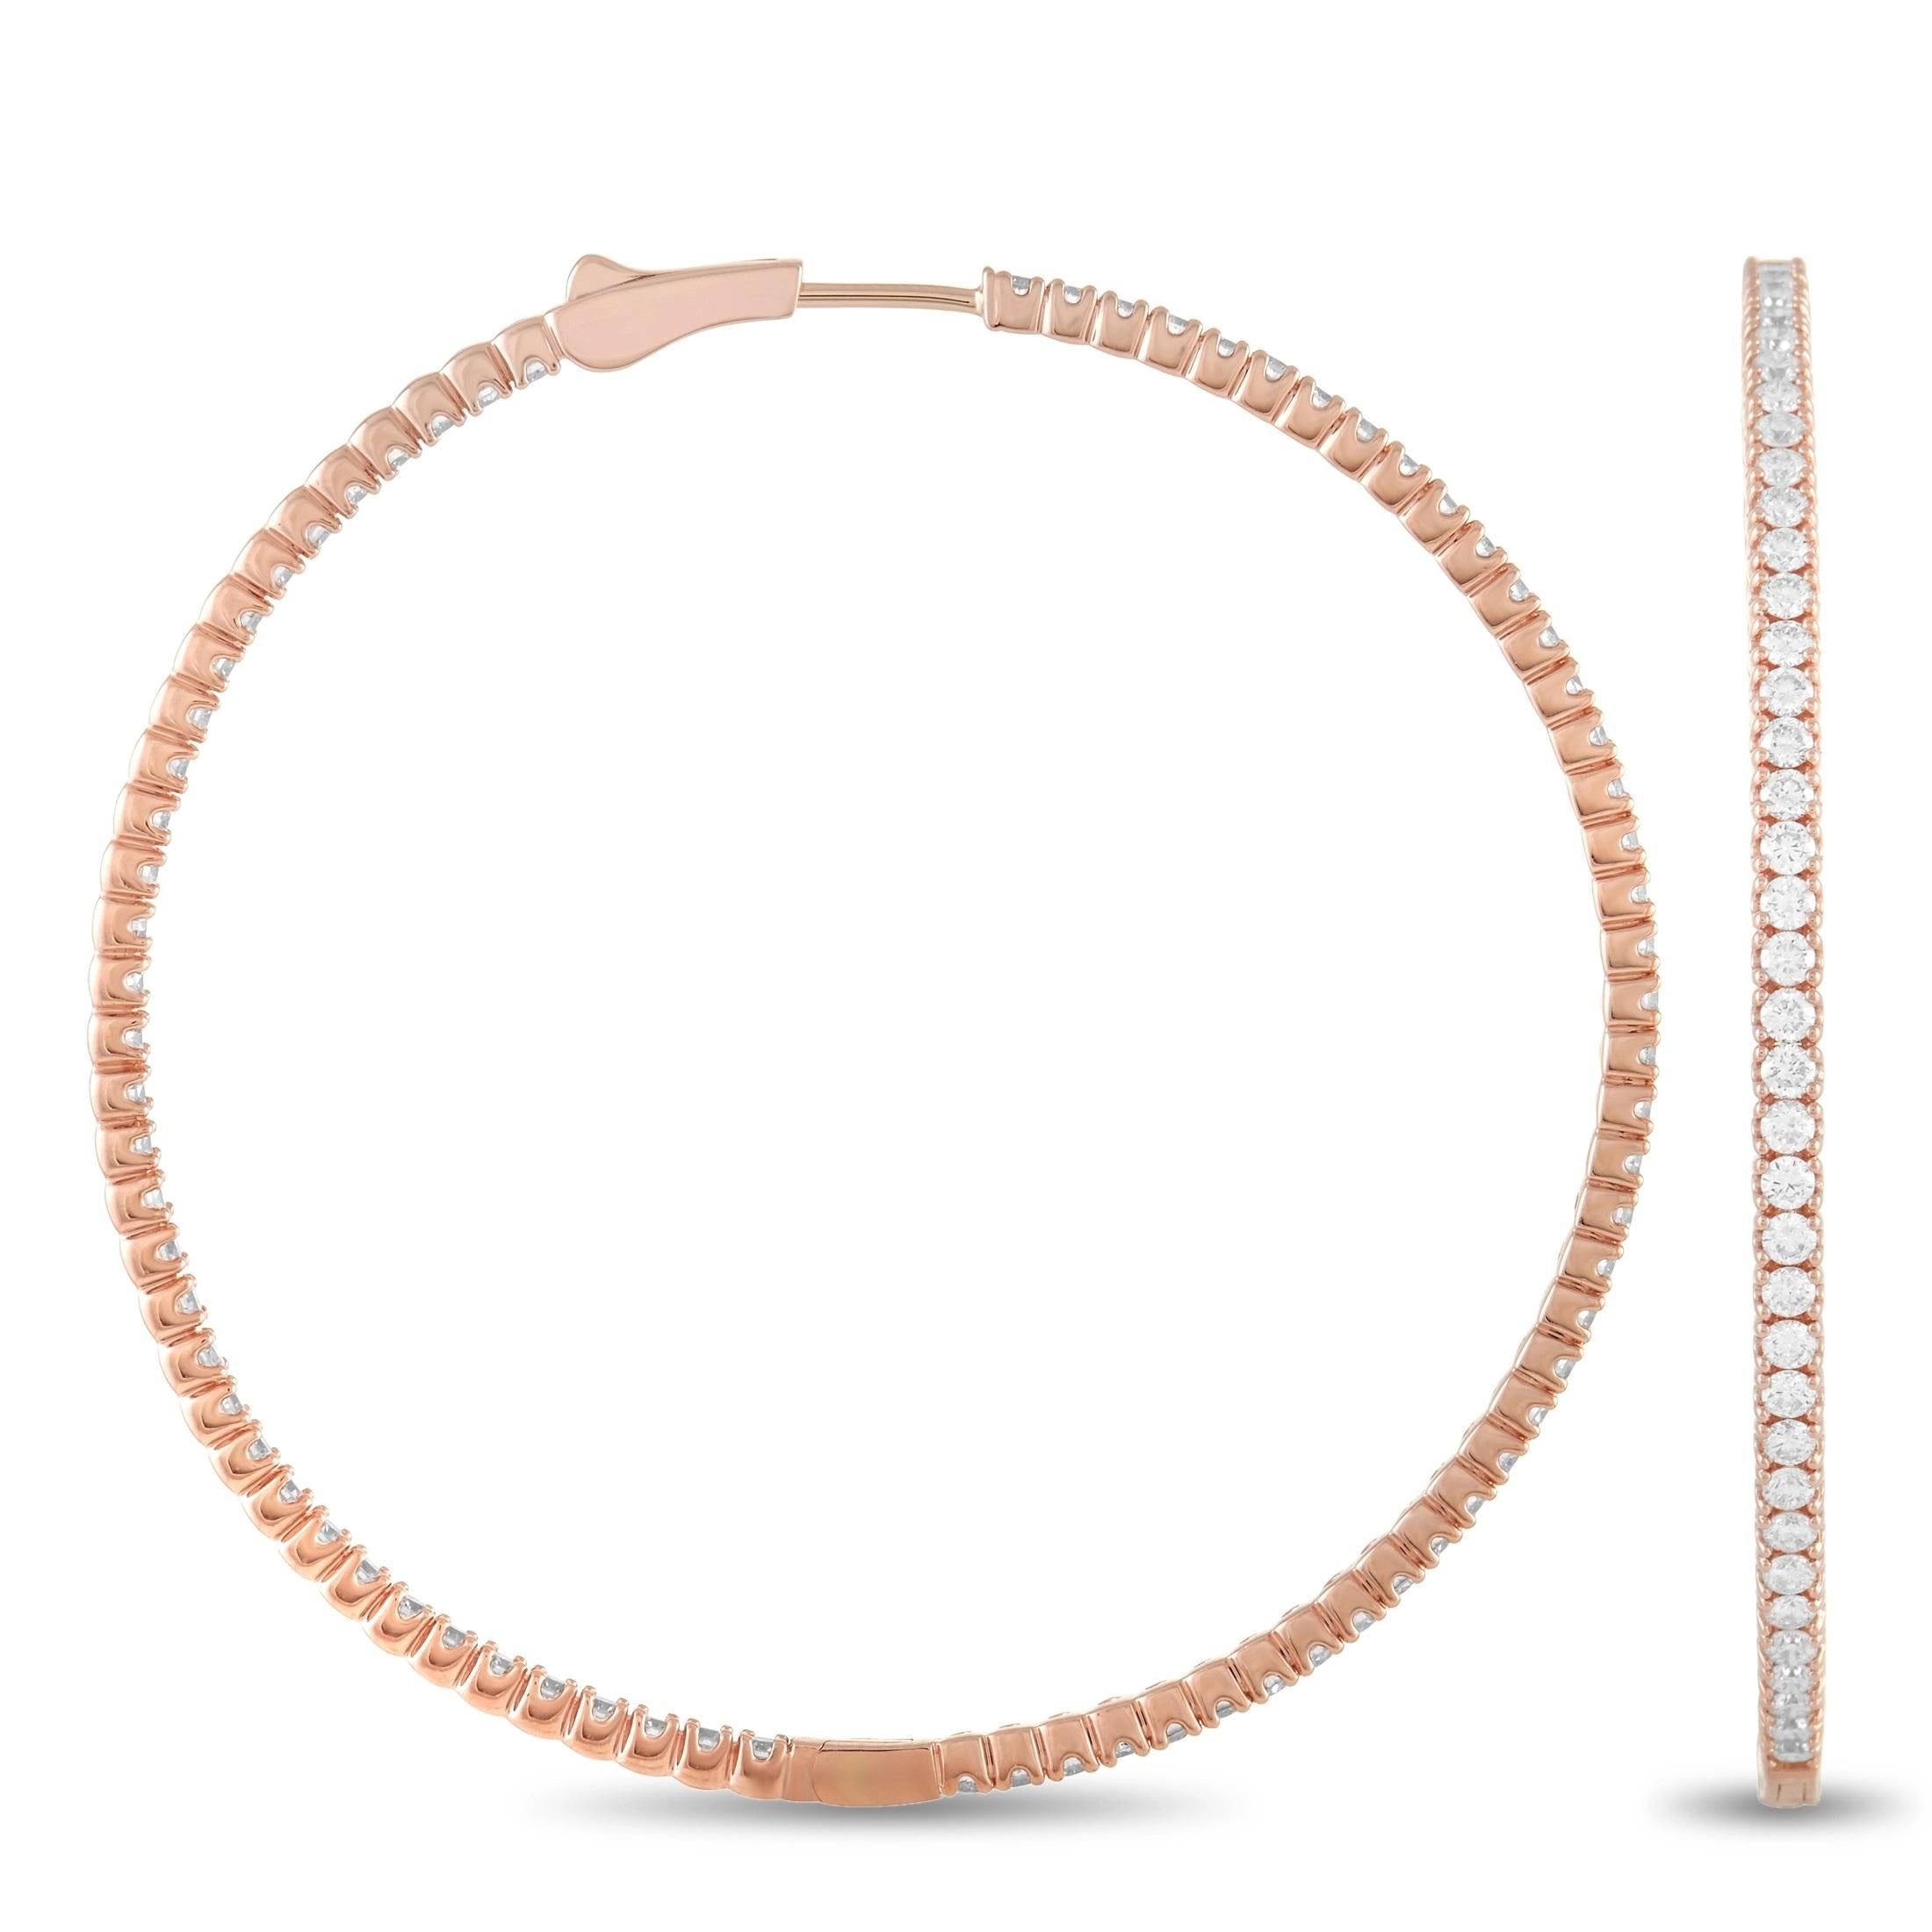 Every inch of these elegant hoop earrings sparkles and shines thanks to a glittering array of diamonds with a total weight of 4.14 carats. Each earring measures 2” round and includes a breathtaking 14K Rose Gold setting. 
 
 This jewelry piece is